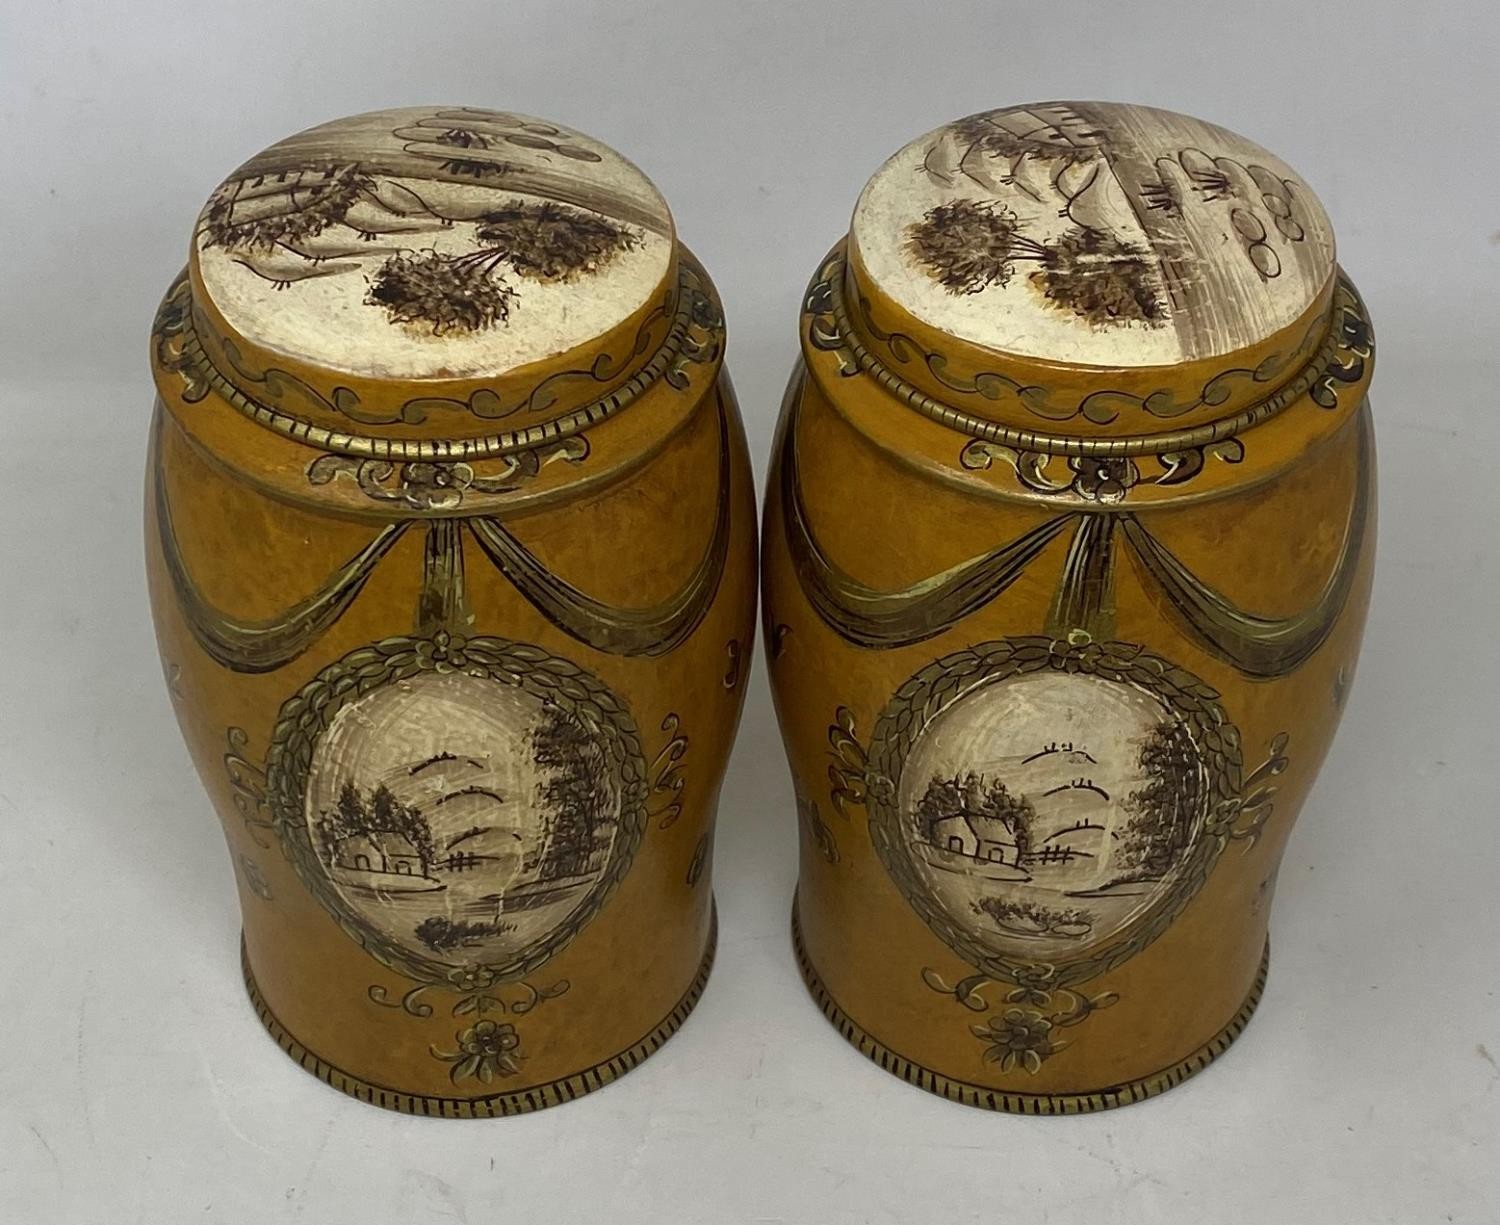 A pair of Toleware caddies, 18 cm high Condition good, a 20th/21st century copy - Image 2 of 2